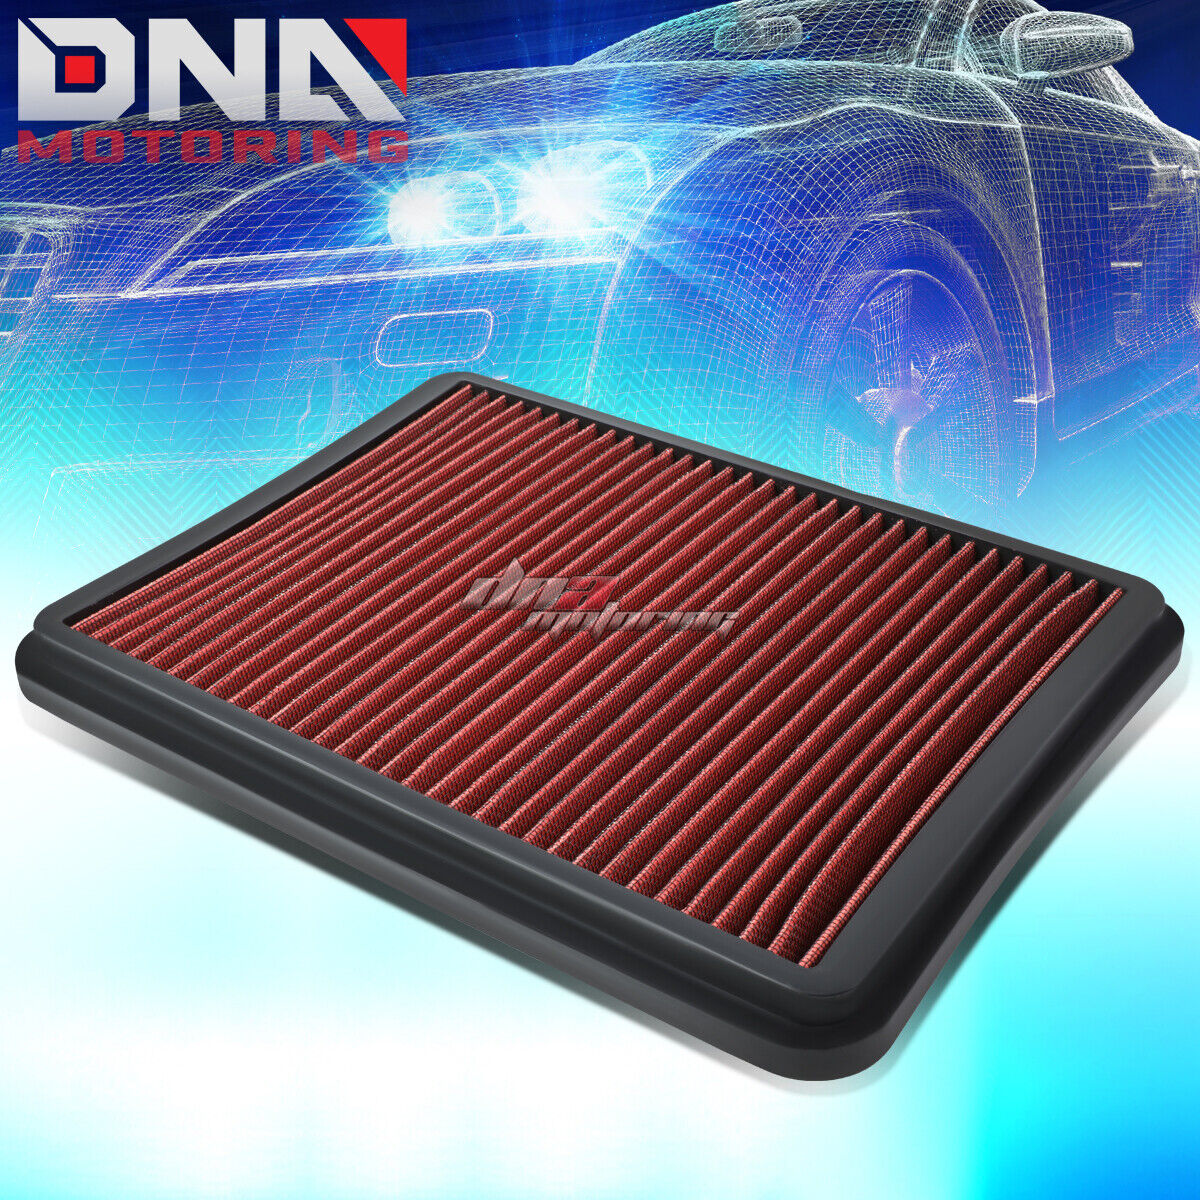 FOR 03-08 4RUNNER/GX470 SUV RED REPLACEMENT RACING HI-FLOW DROP IN AIR FILTER